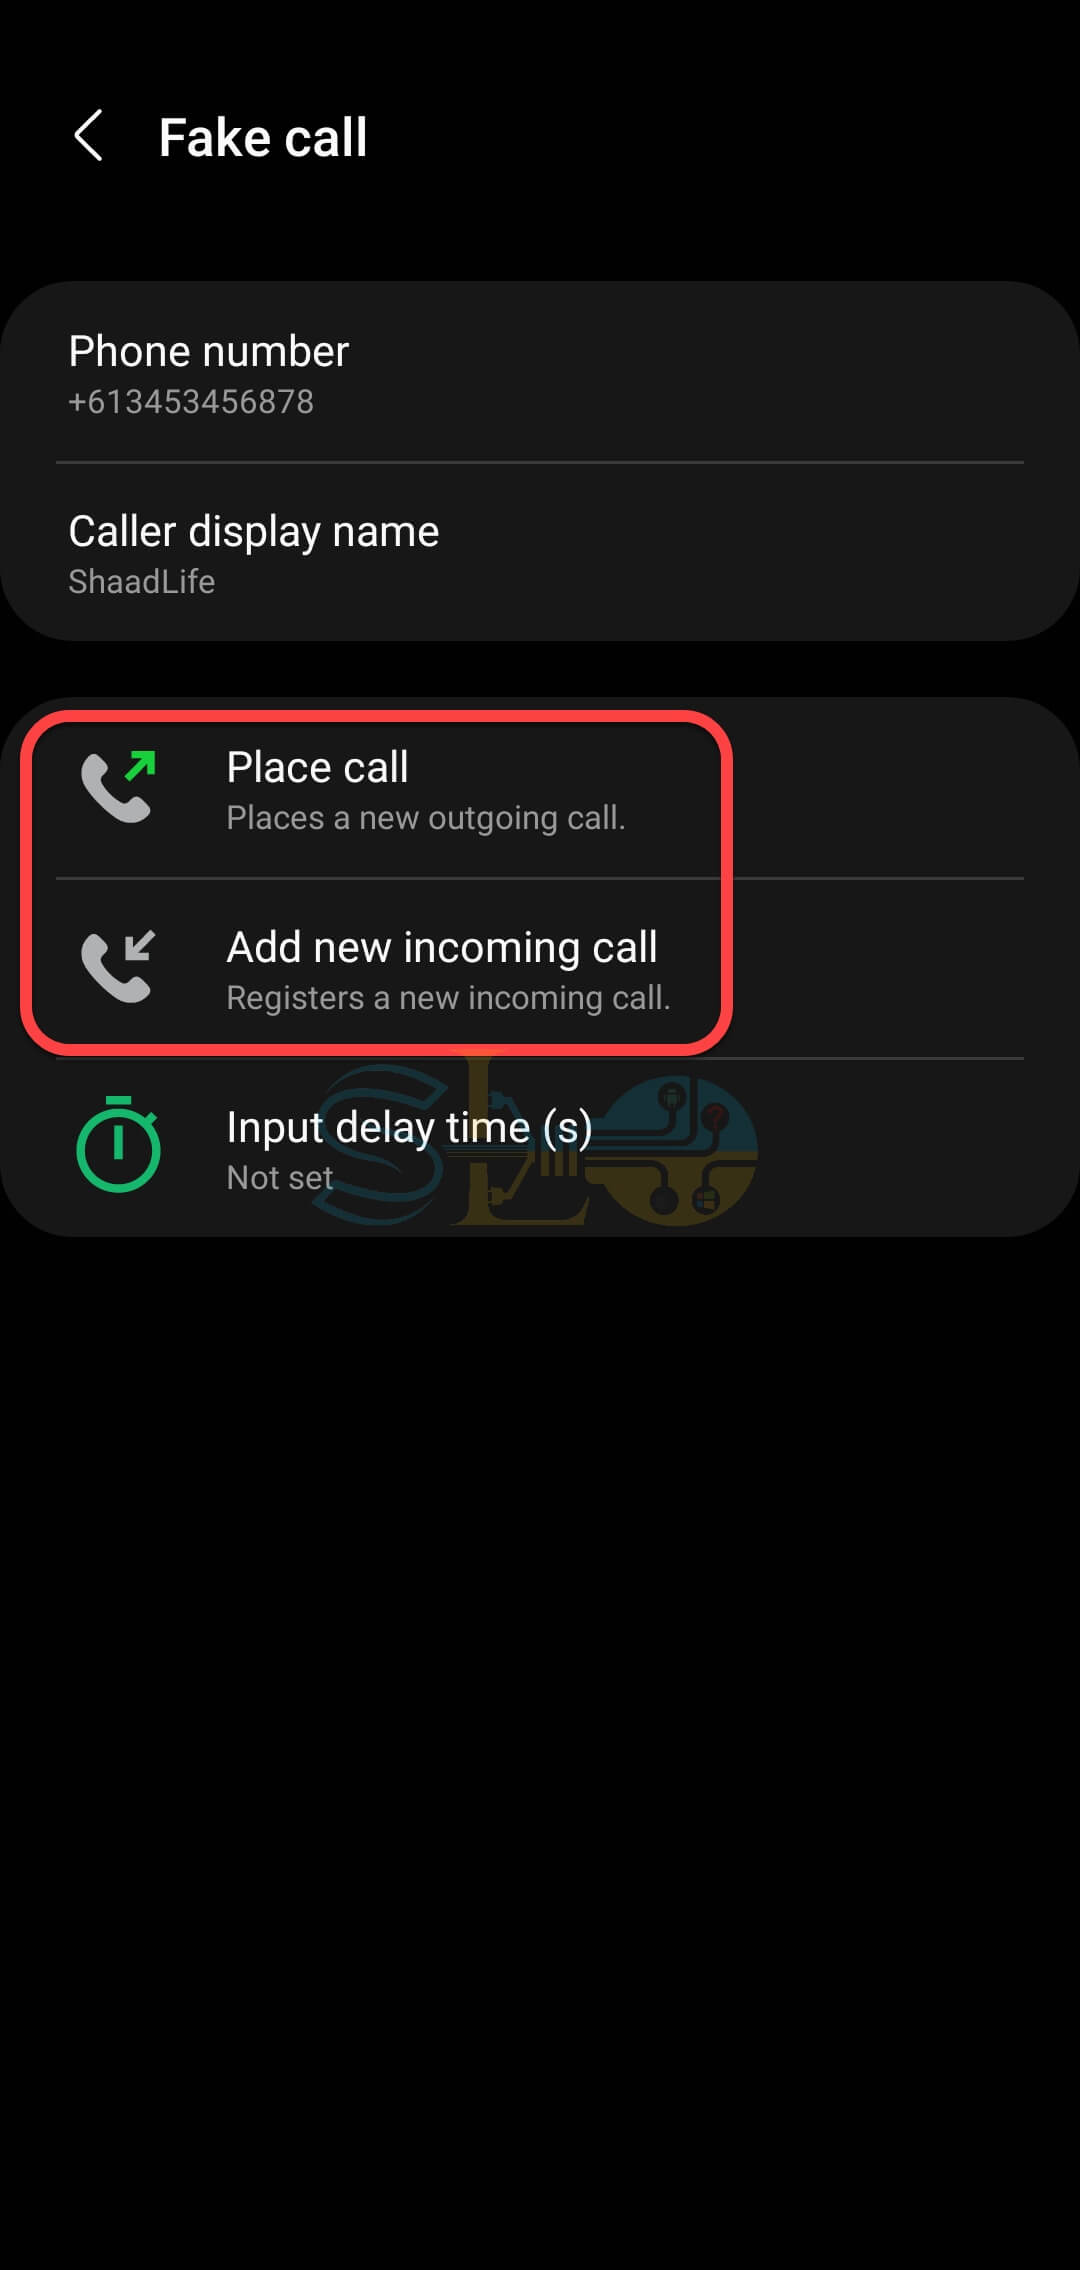 How to Activate Fake Call on Samsung Galaxy [Outgoing & Incoming Calls]